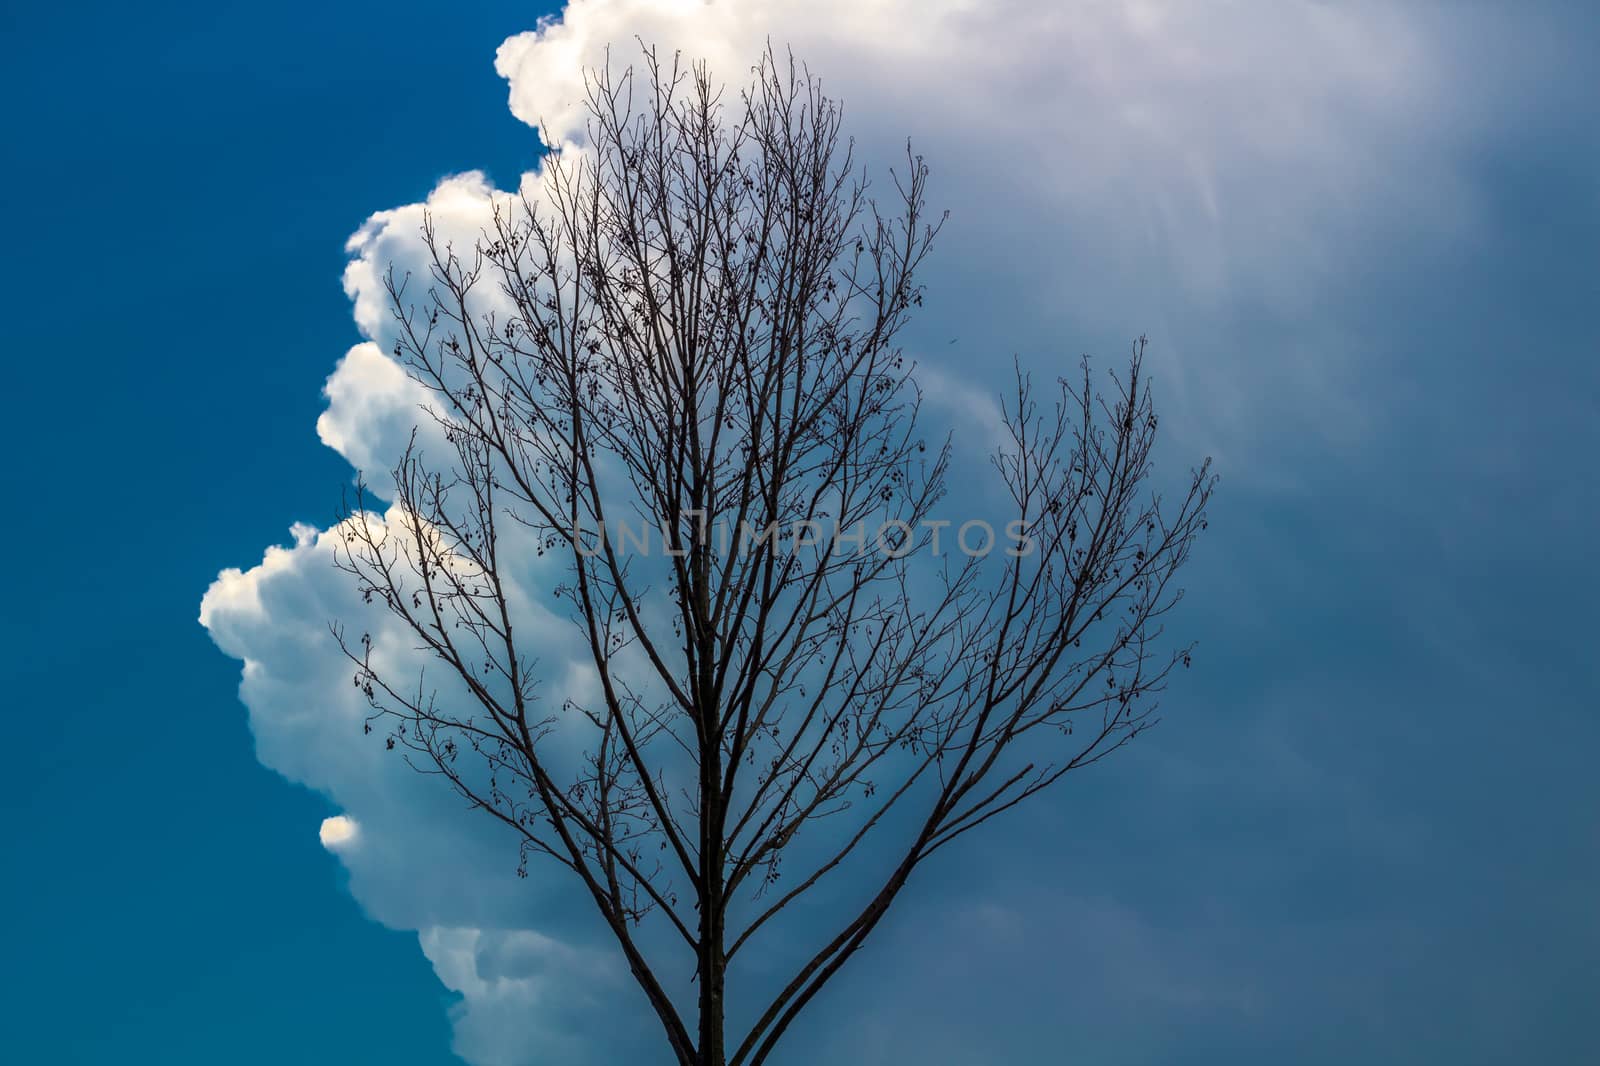 Cloudy tree before storm by VeraVerano